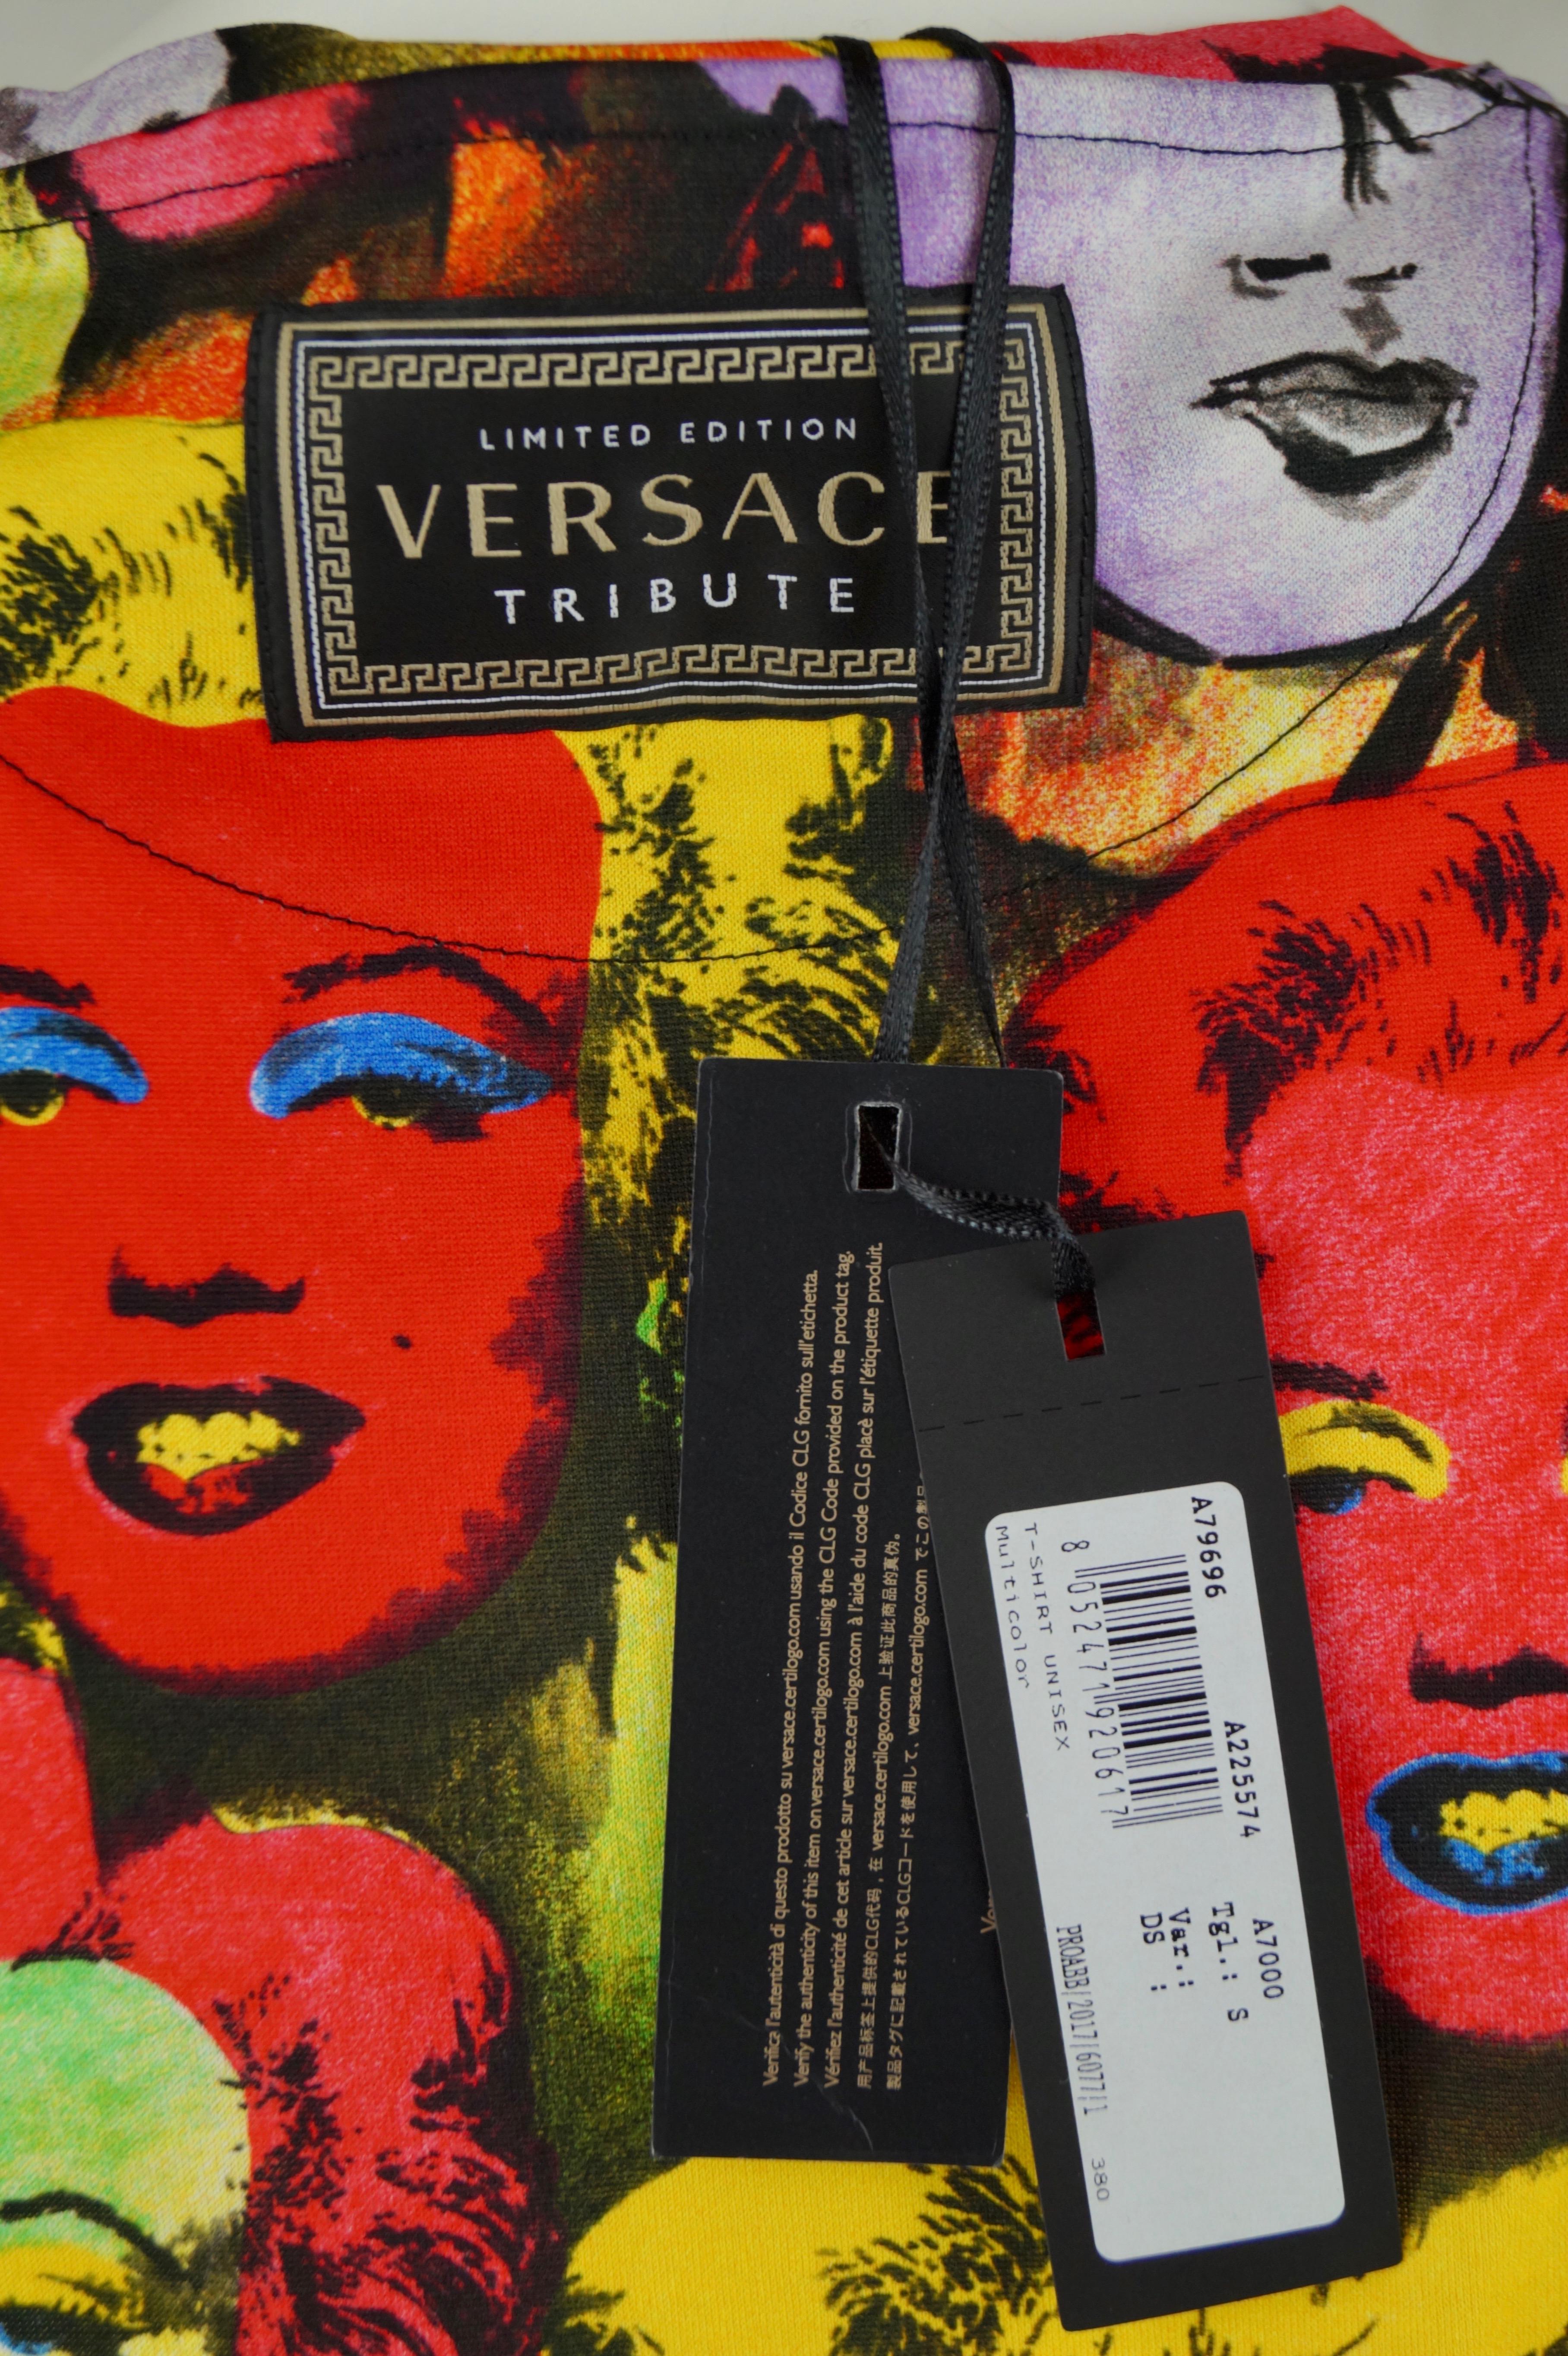 VERSACE Tribute 2017 Warhol SS 1991 Marilyn Monroe and James Dean T-shirt For Sale 2